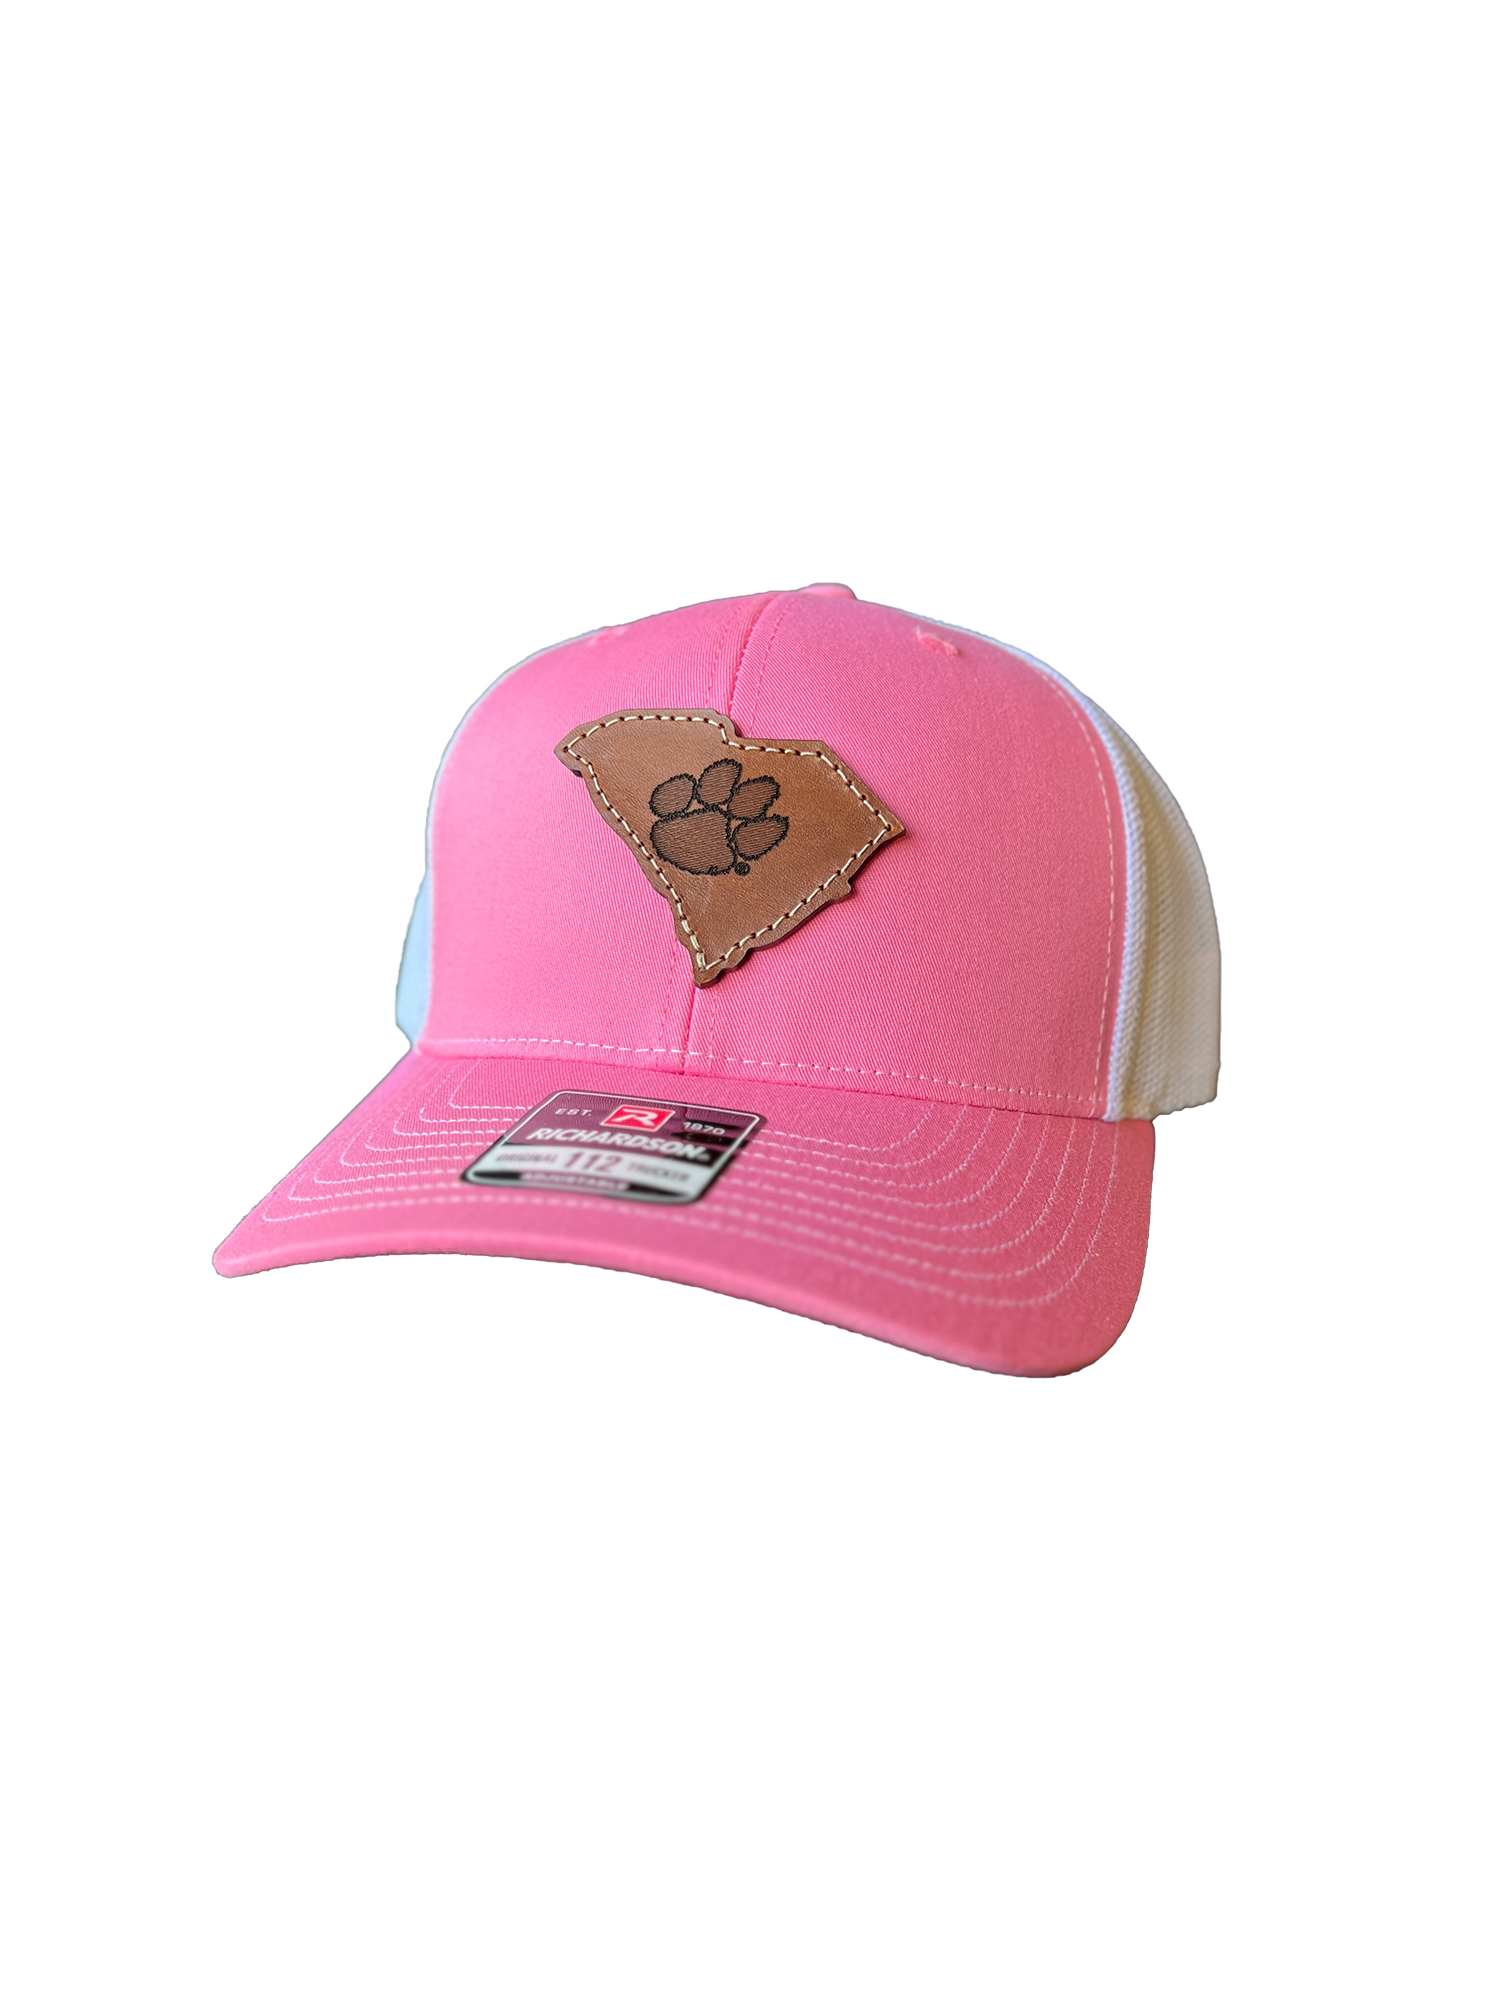 Clemson Tigers Leather South Carolina Patch Trucker Hat-(State Tiger Paw) Pink/White